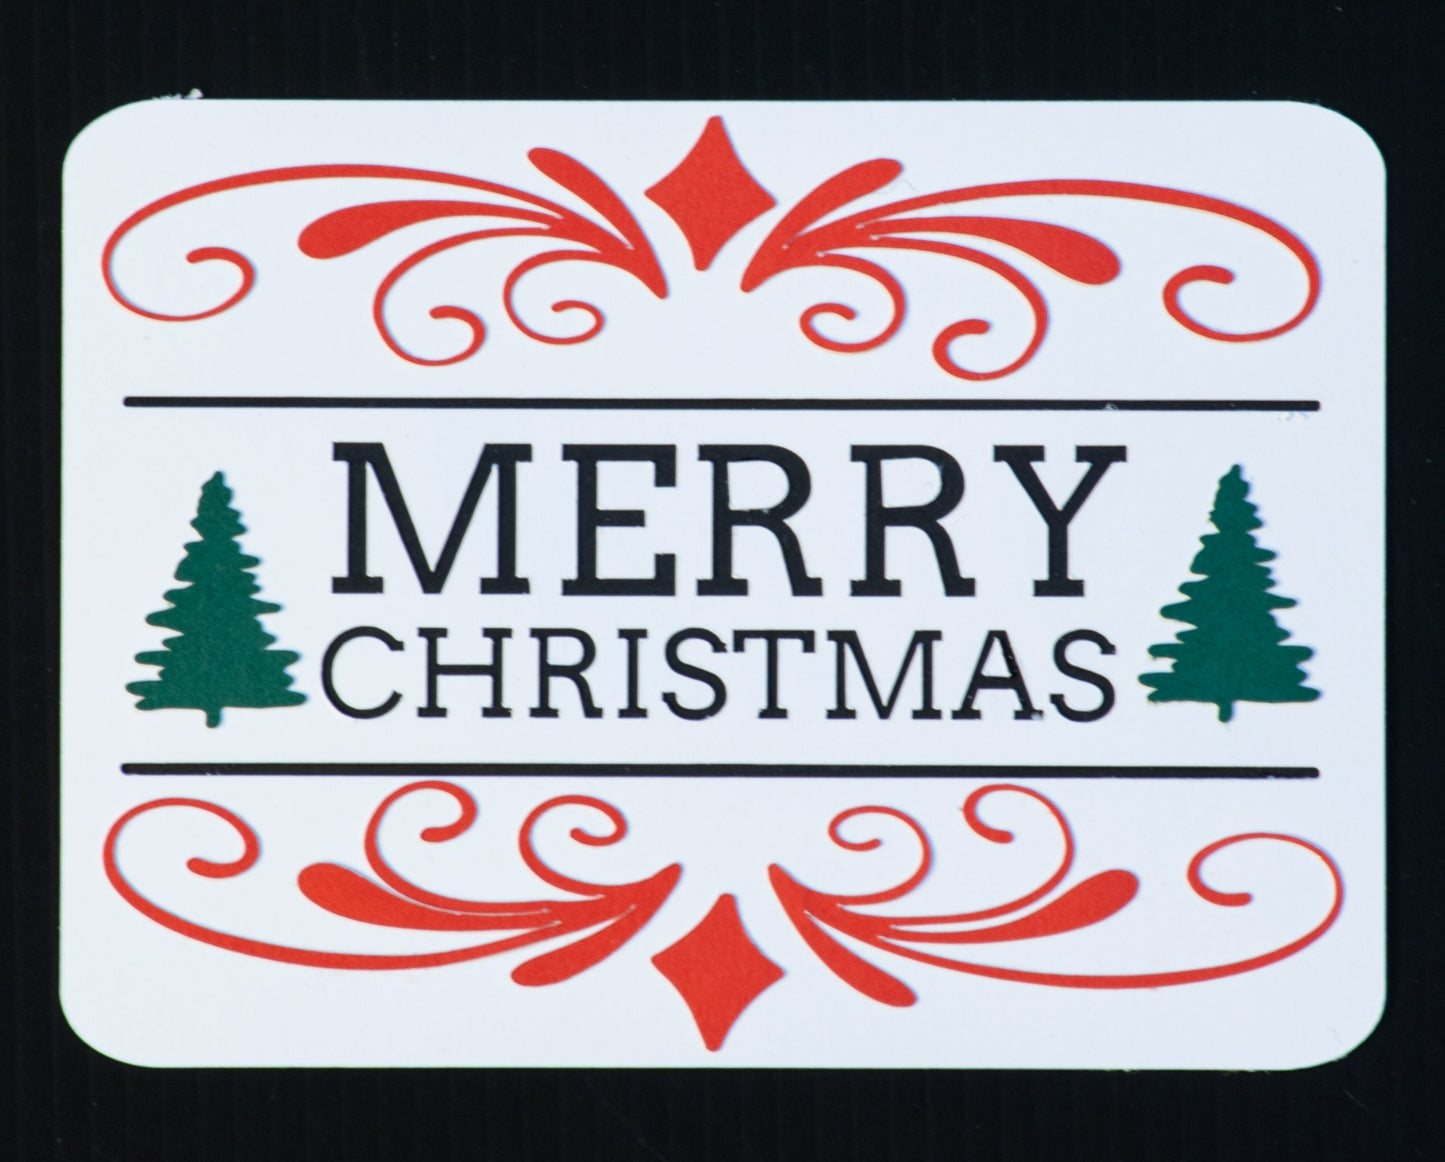 Titles - Merry Christmas (sign)